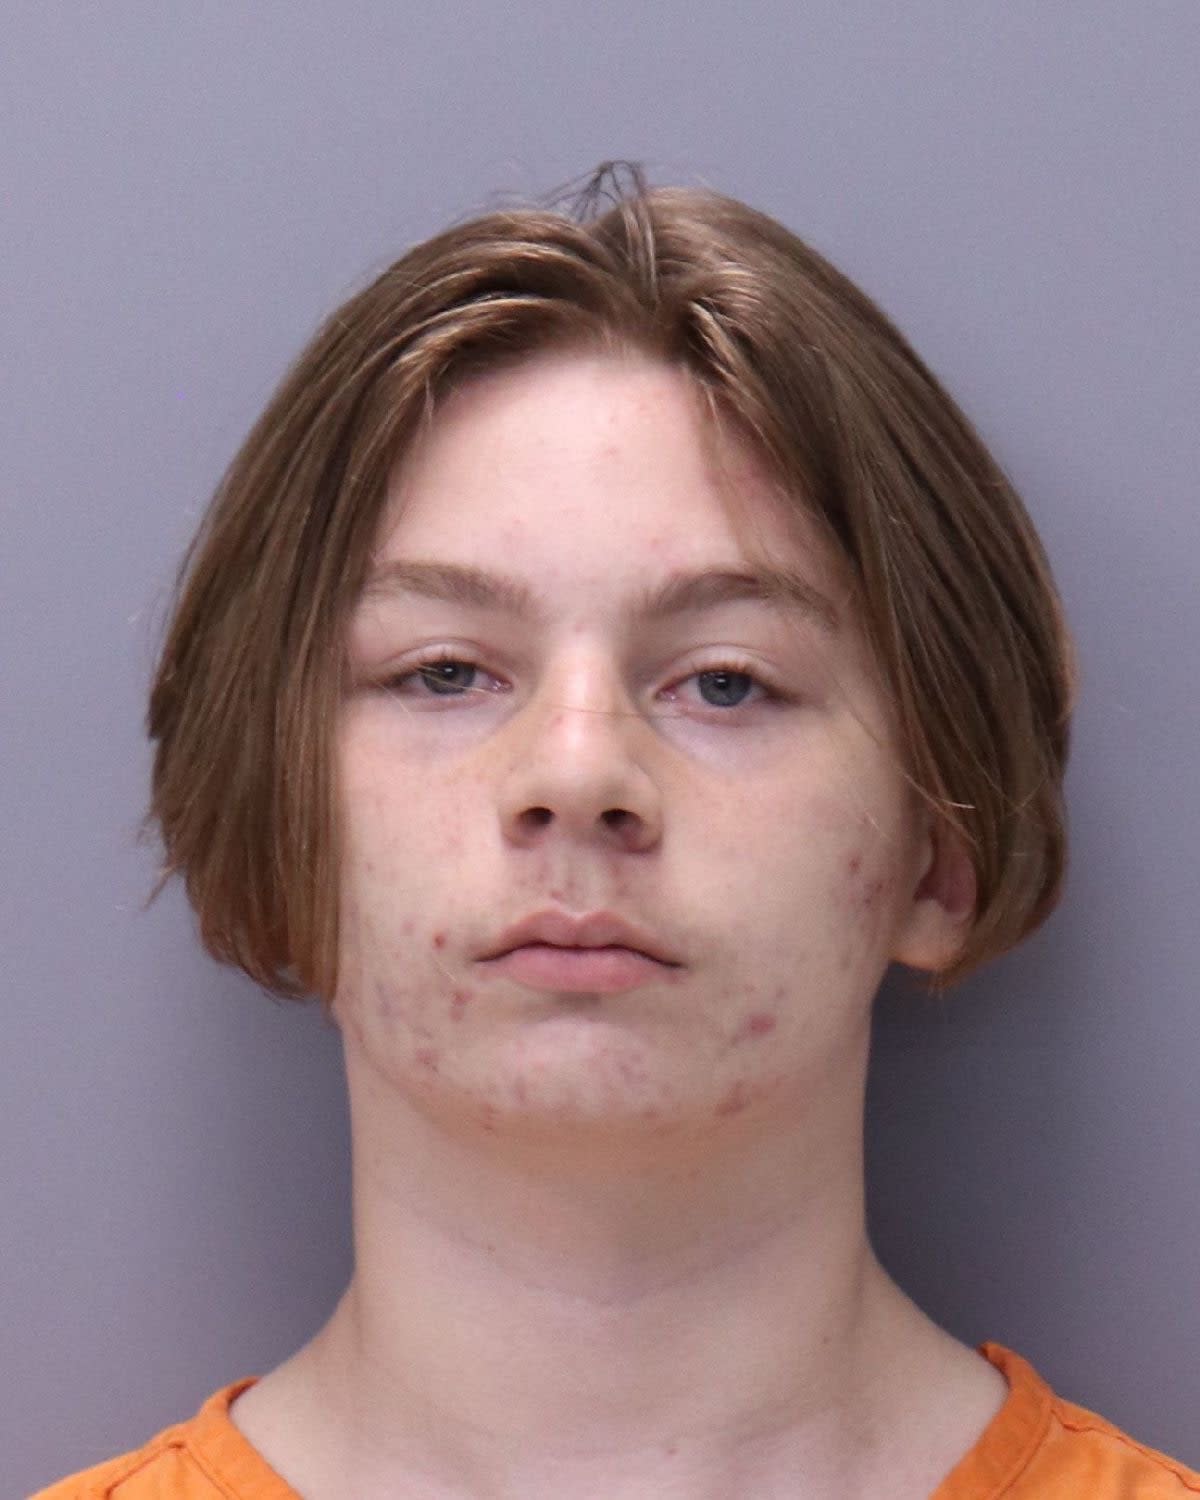 <p>Police have arrested Aiden Fucci, 14, who has been charged with the murder of 13-year-old Tristyn Bailey.</p> (St Johns County Sheriff’s Office)